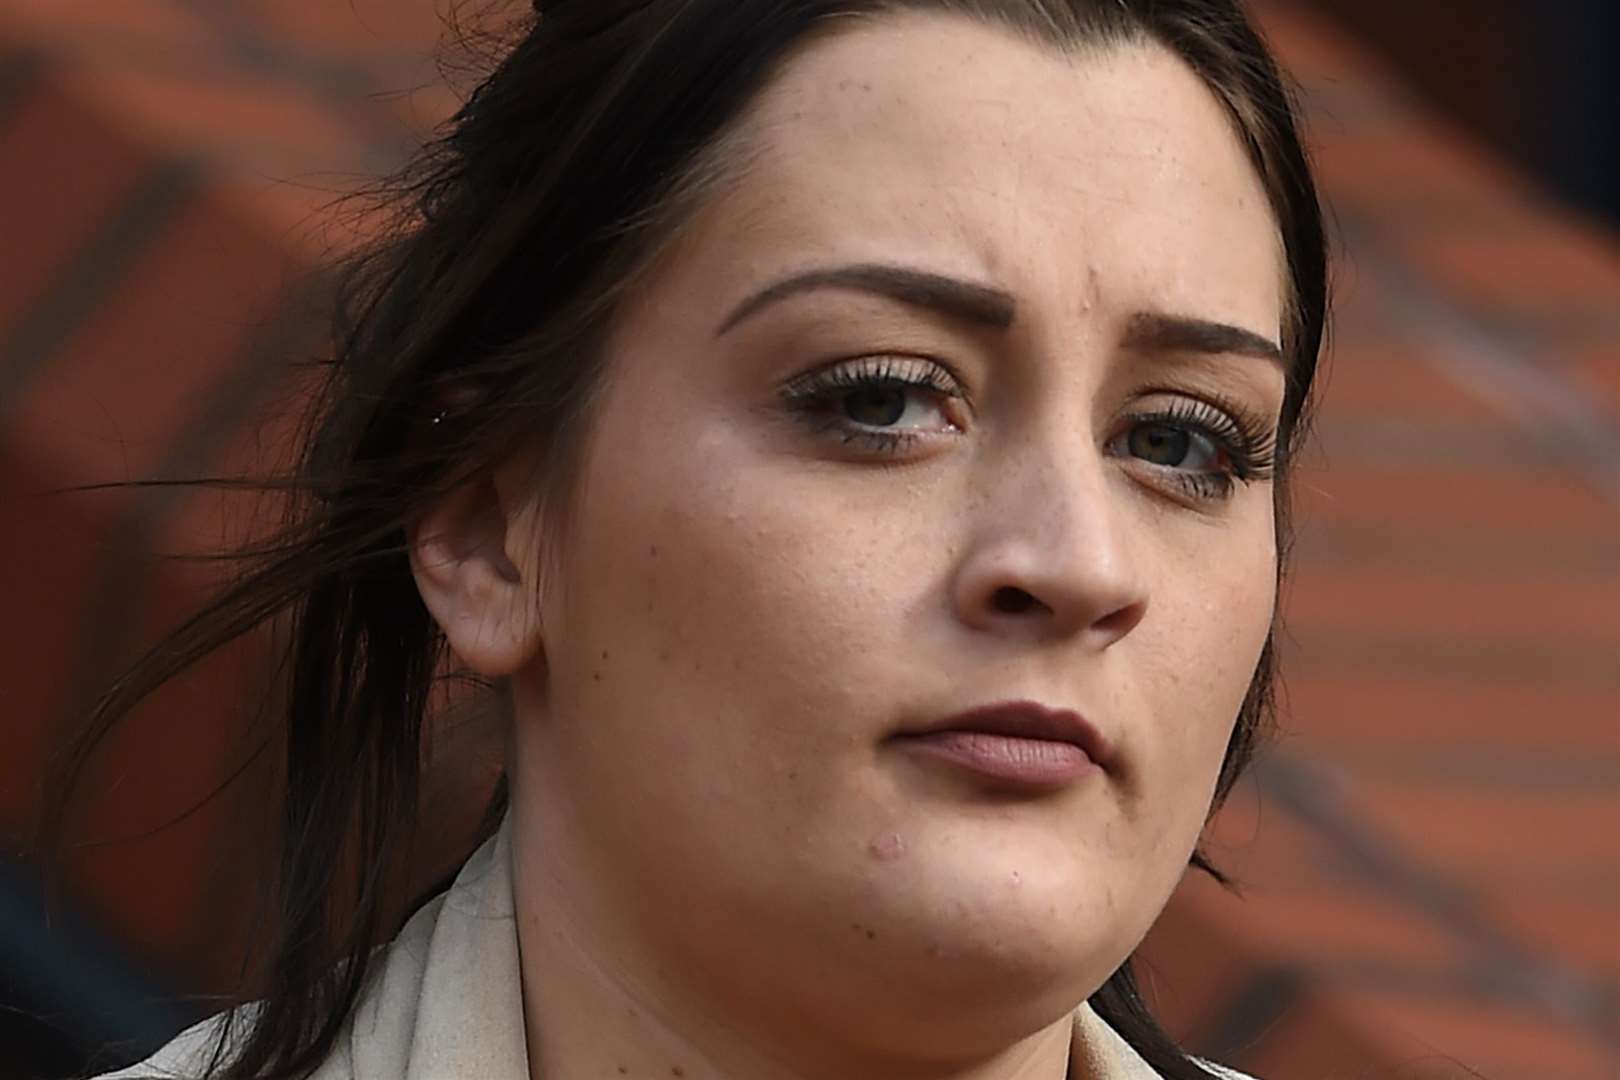 Woman Jailed For A Second Time For Knife Murder Of Her Partner Following Retrial